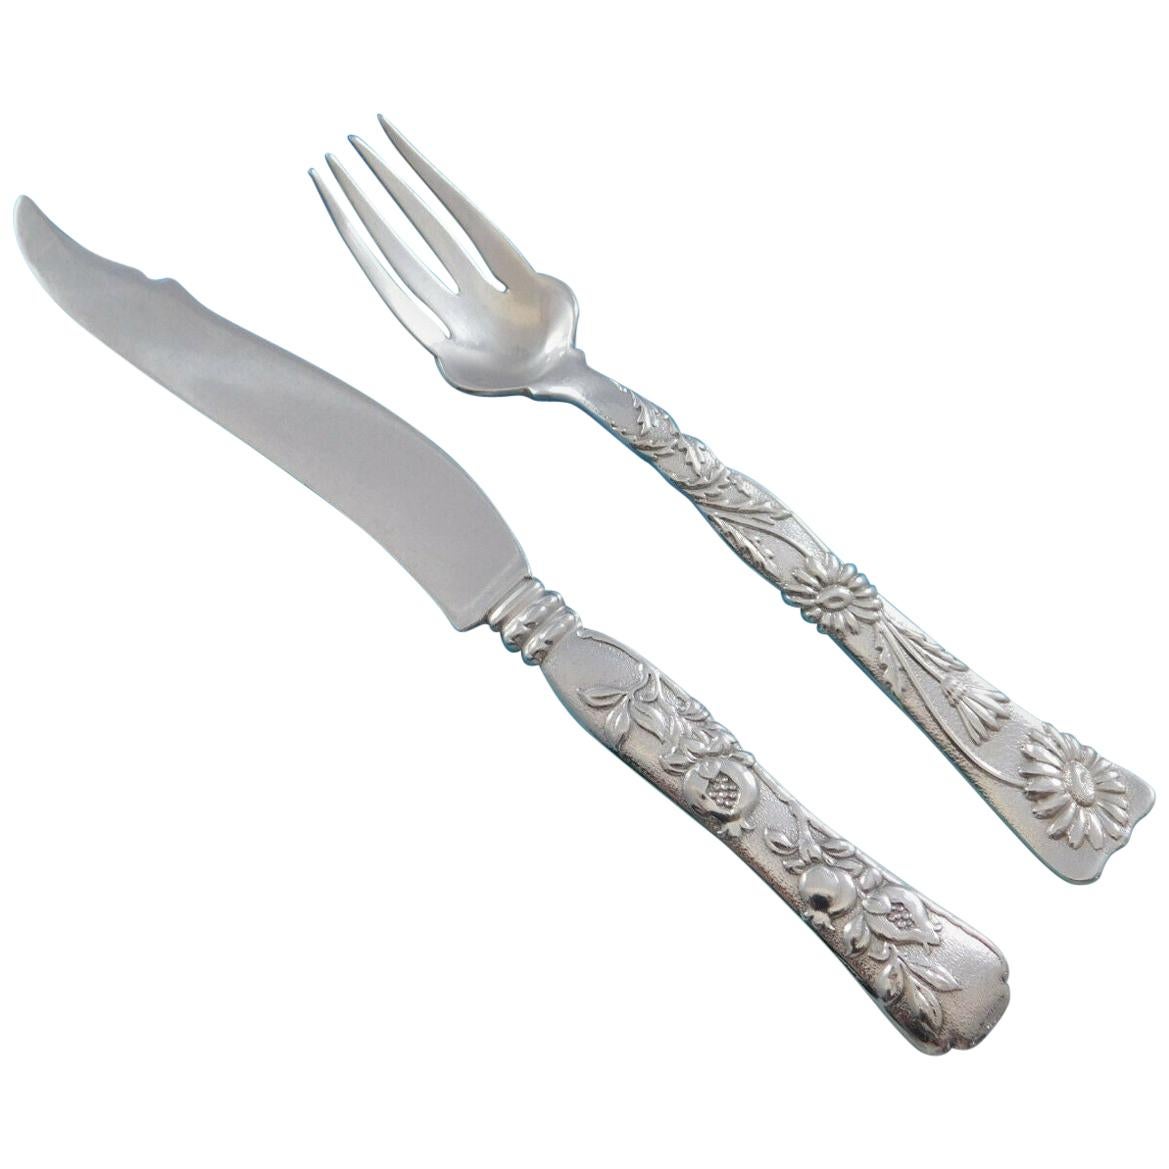 WALLACE STERLING SILVER 925 VIOLET 1904 INDIVIDUAL FRUIT FORK STAINLESS TINES 